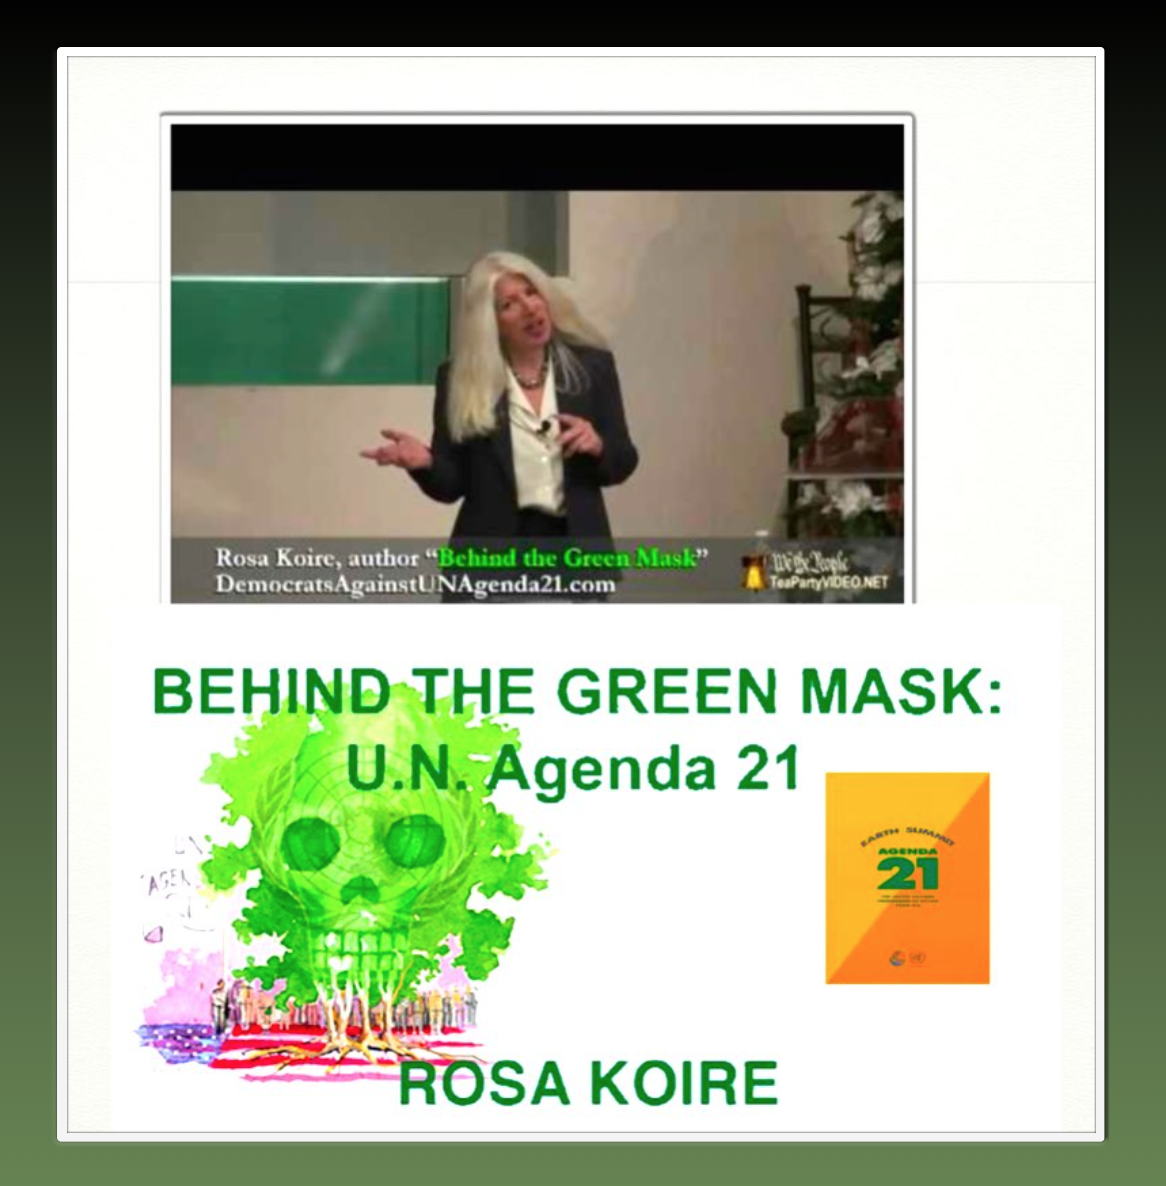 BEHIND THE GREEN MASK